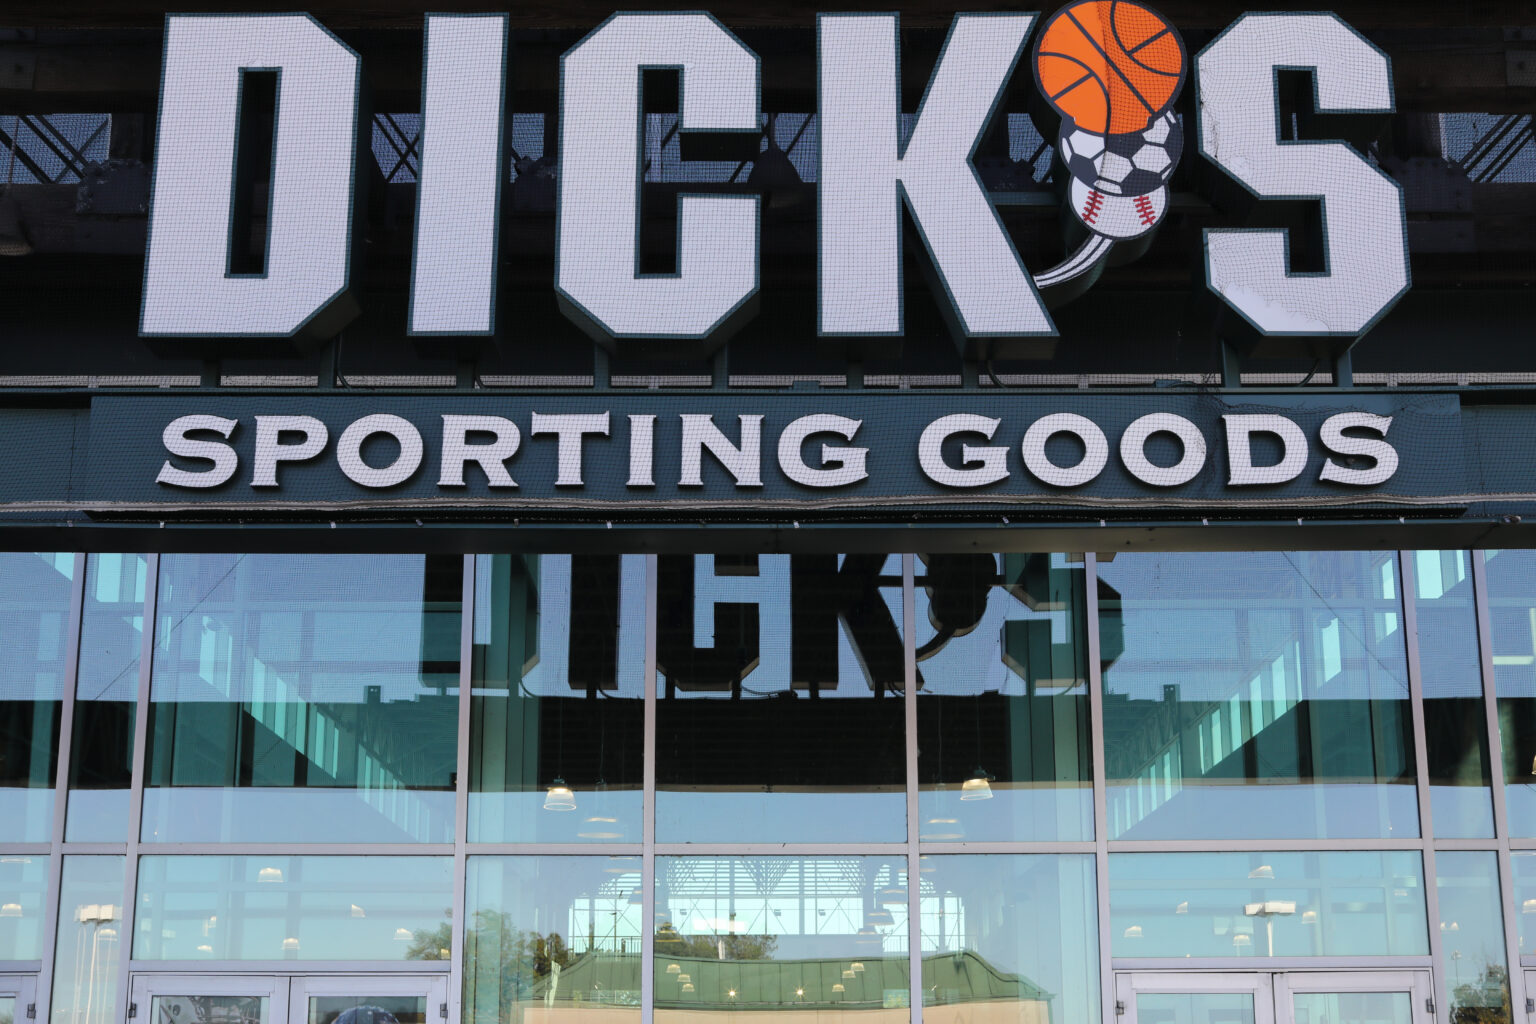 Logo sign above the entrance of a DICK'S Sporting Goods store